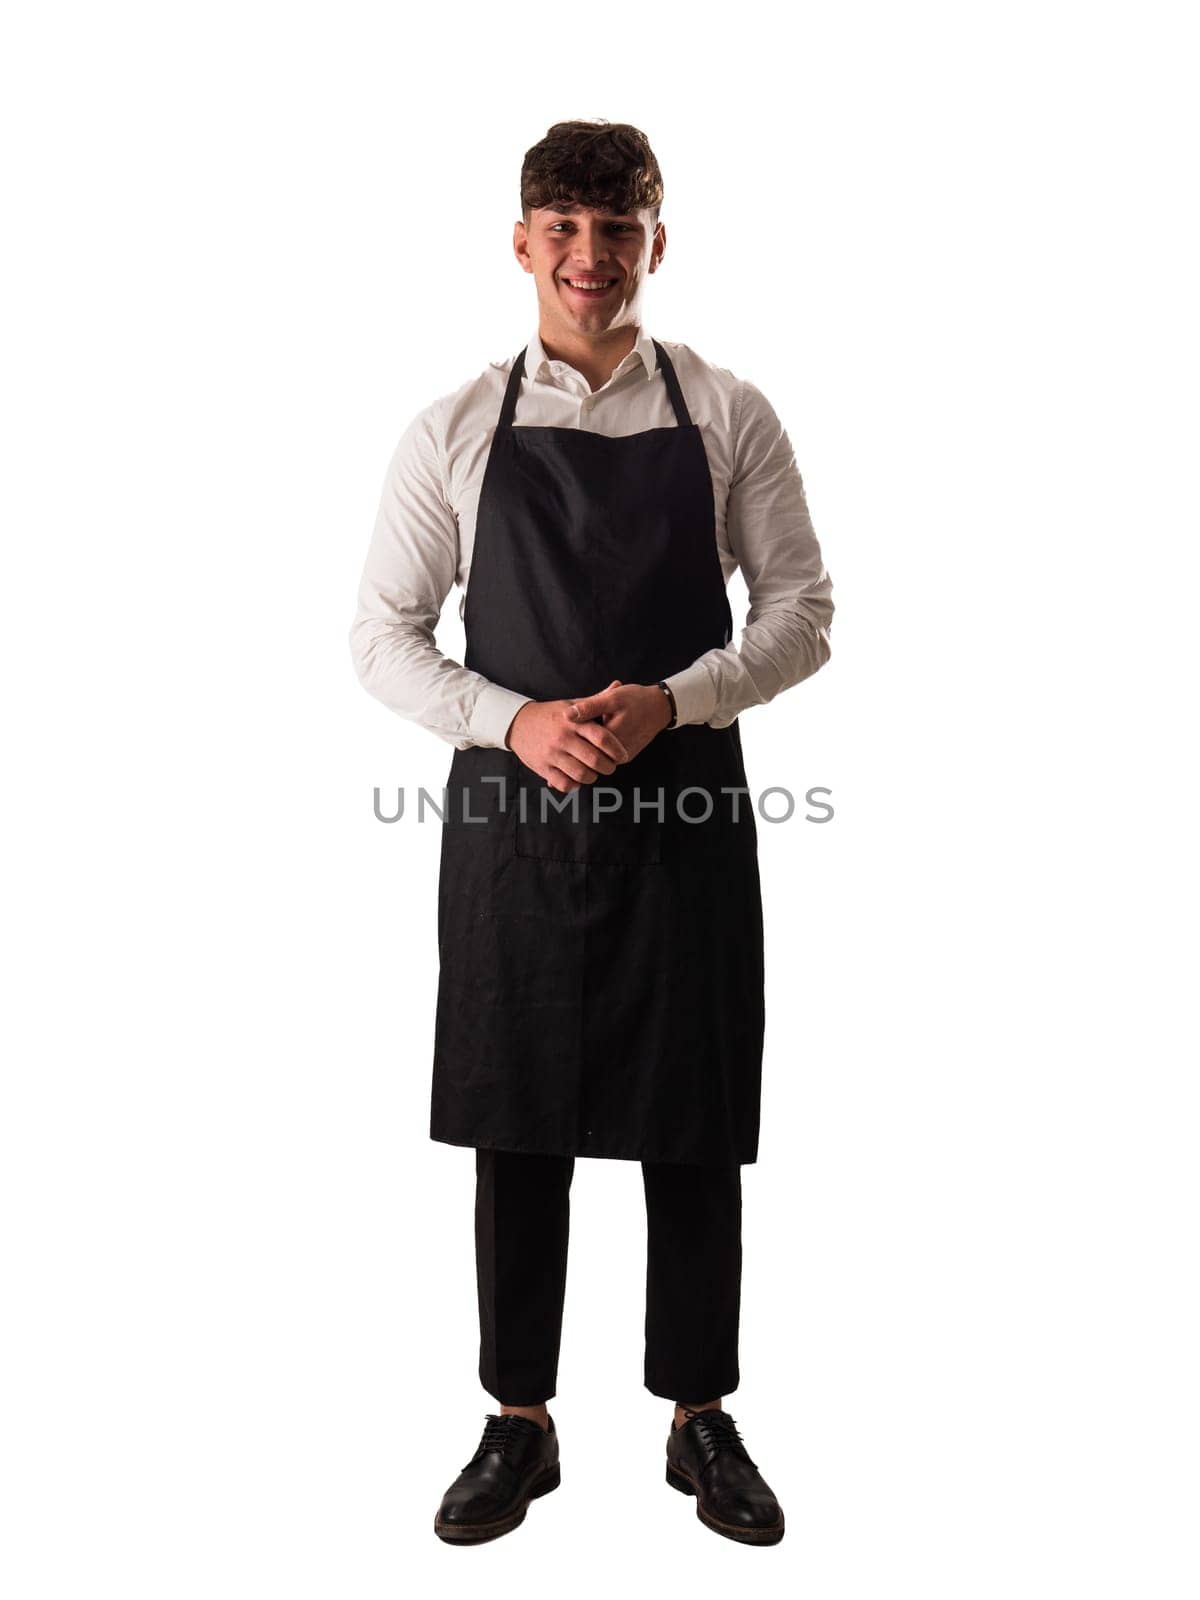 Full length shot of young chef or waiter posing, wearing black apron and white shirt by artofphoto